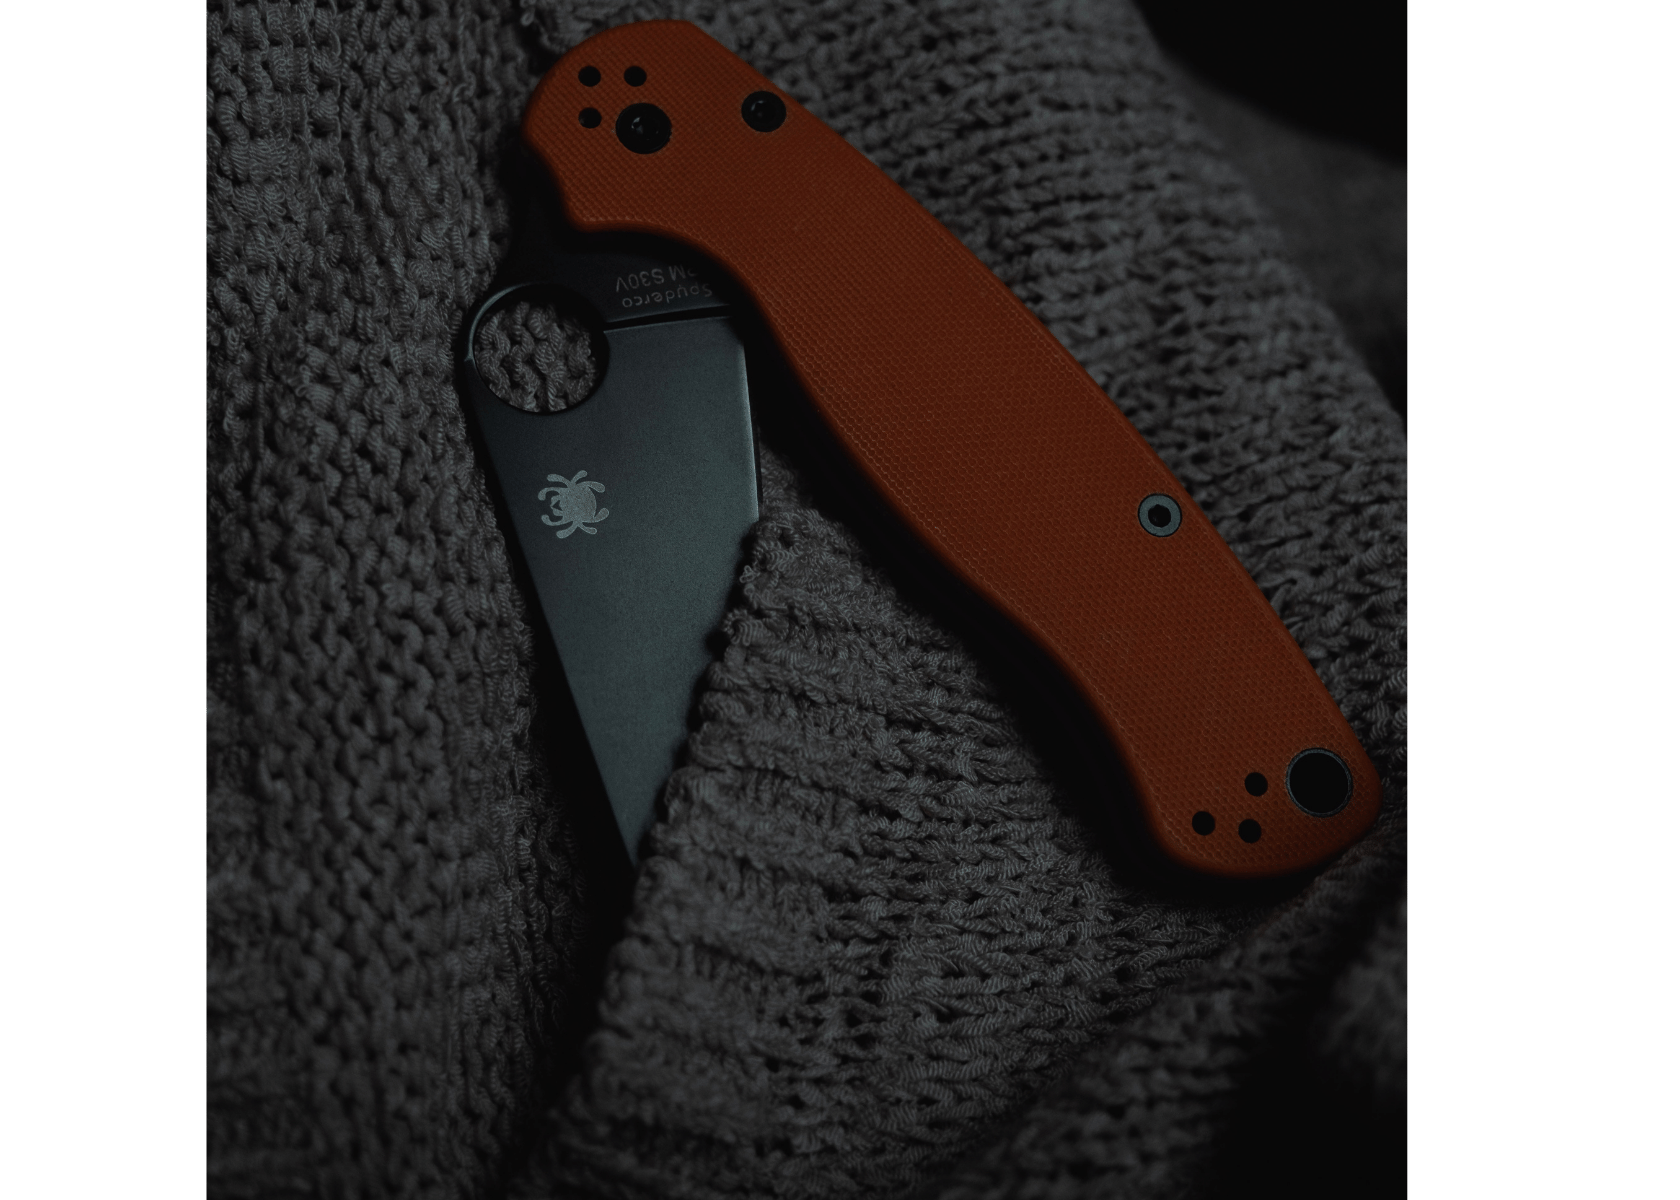 A Spyderco EDC knife with black blade and red handles on a grey sweater.